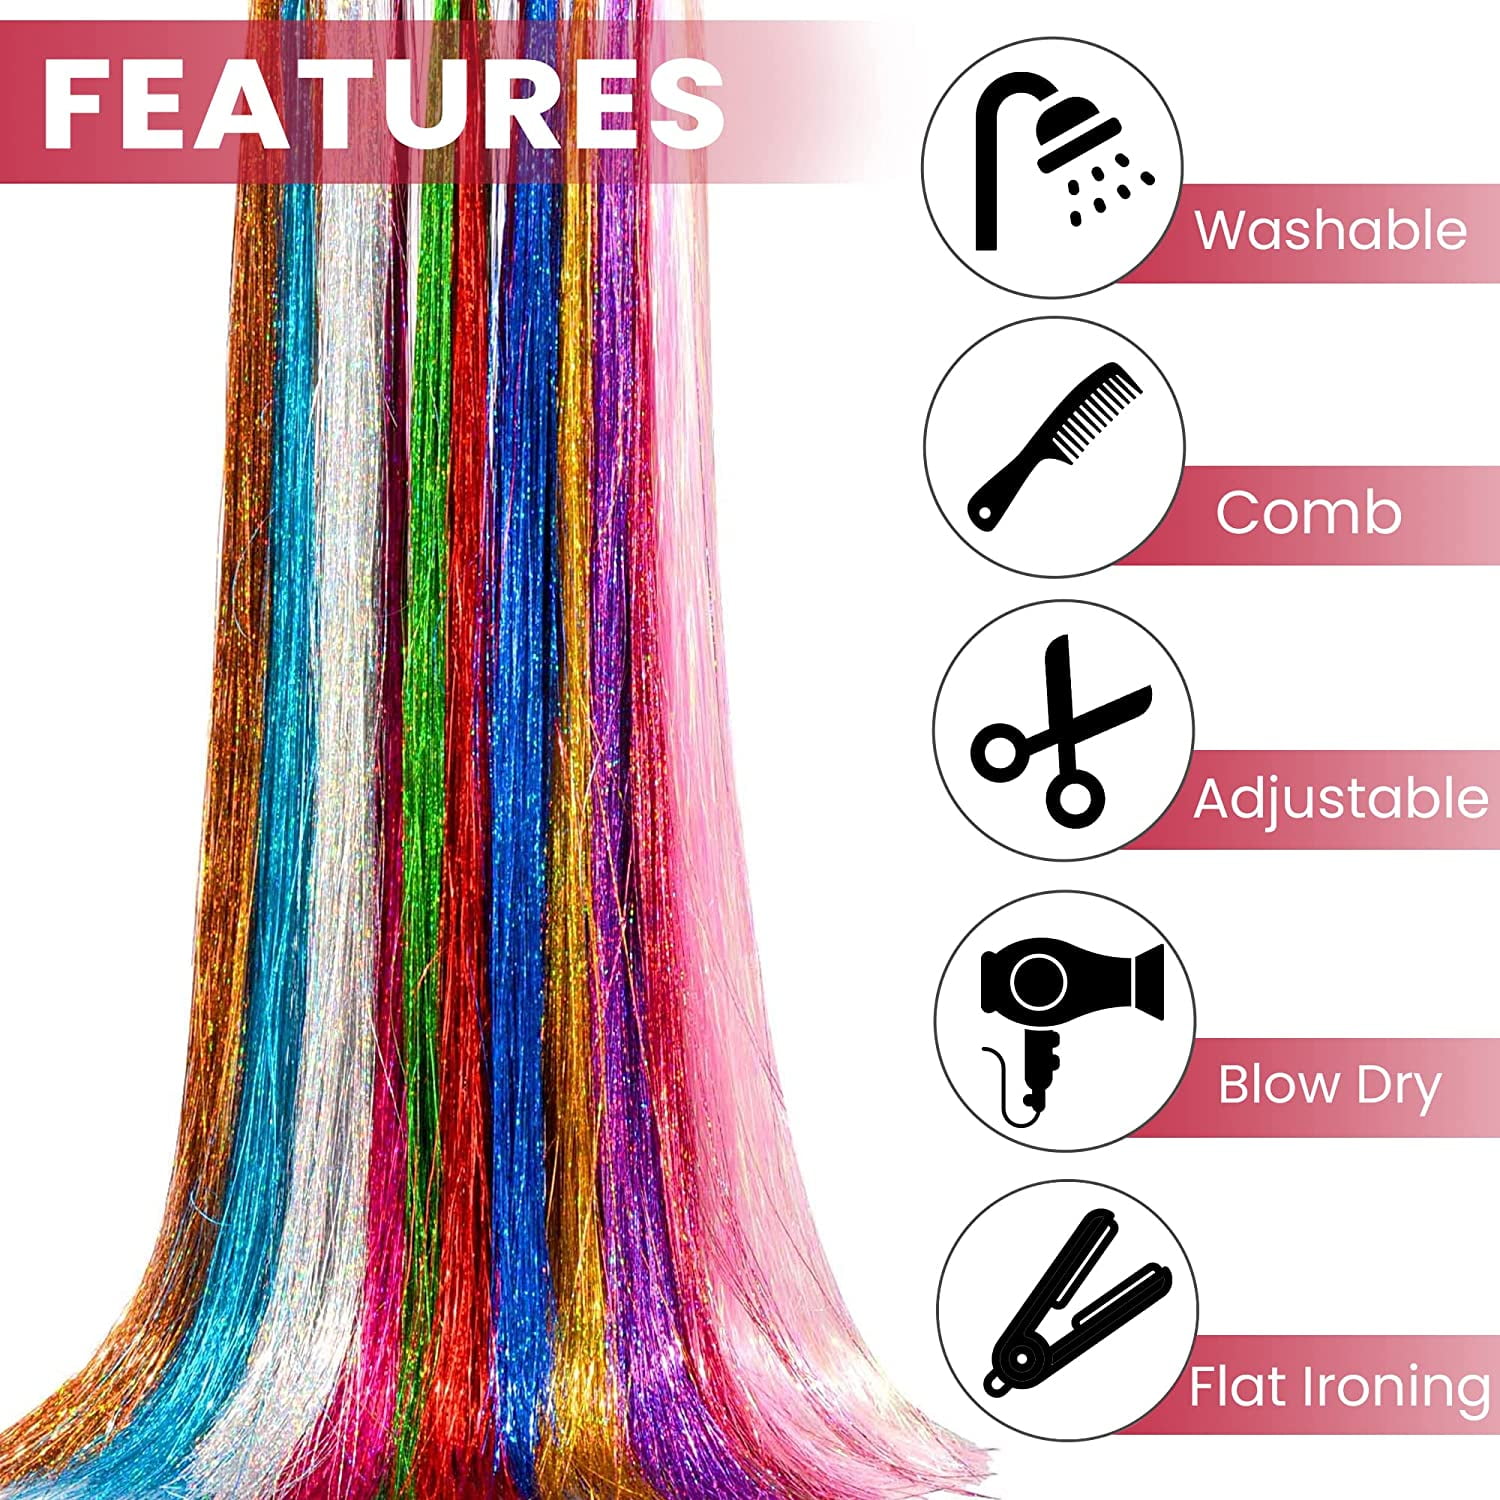 Charm Notch Hair Extension Beads set of 2500 pcs in 5 Colors 500 ea Color  NEW